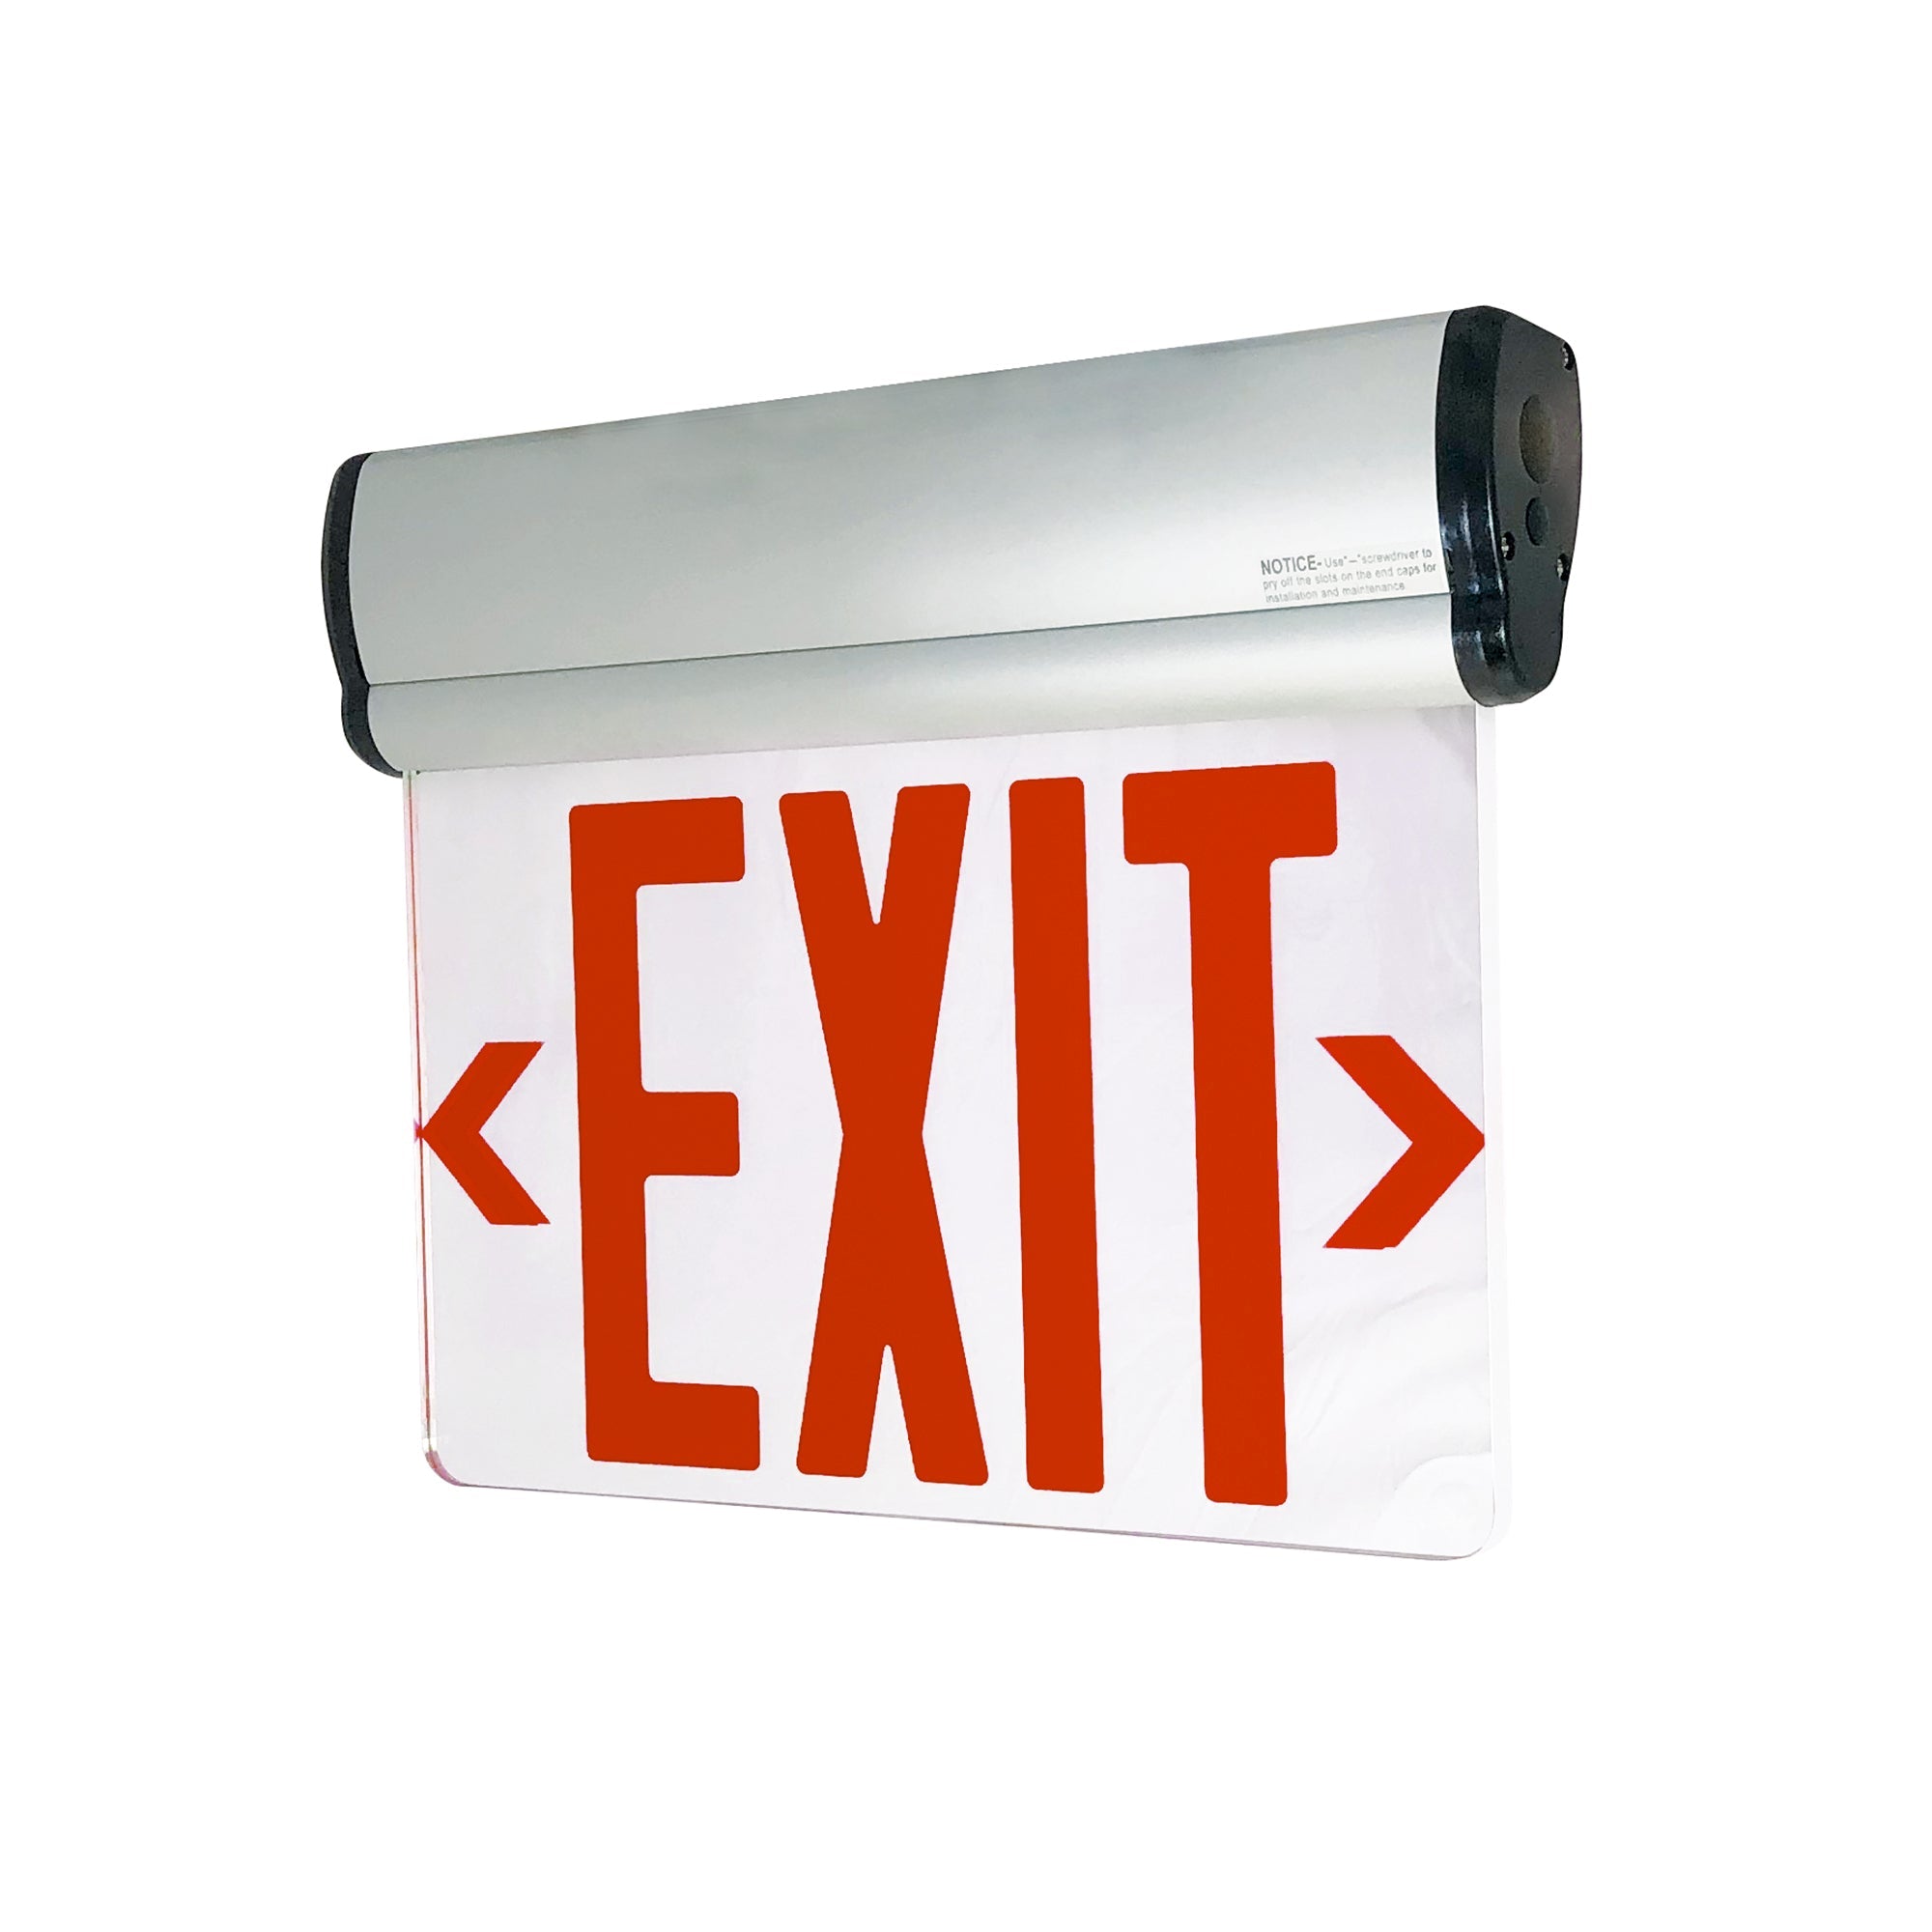 Nora Lighting NX-812-LEDR2MA - Exit / Emergency - Surface Adjustable LED Edge-Lit Exit Sign, Battery Backup, 6 Inch Red Letters, Double Face / Mirrored Acrylic, Aluminum Housing